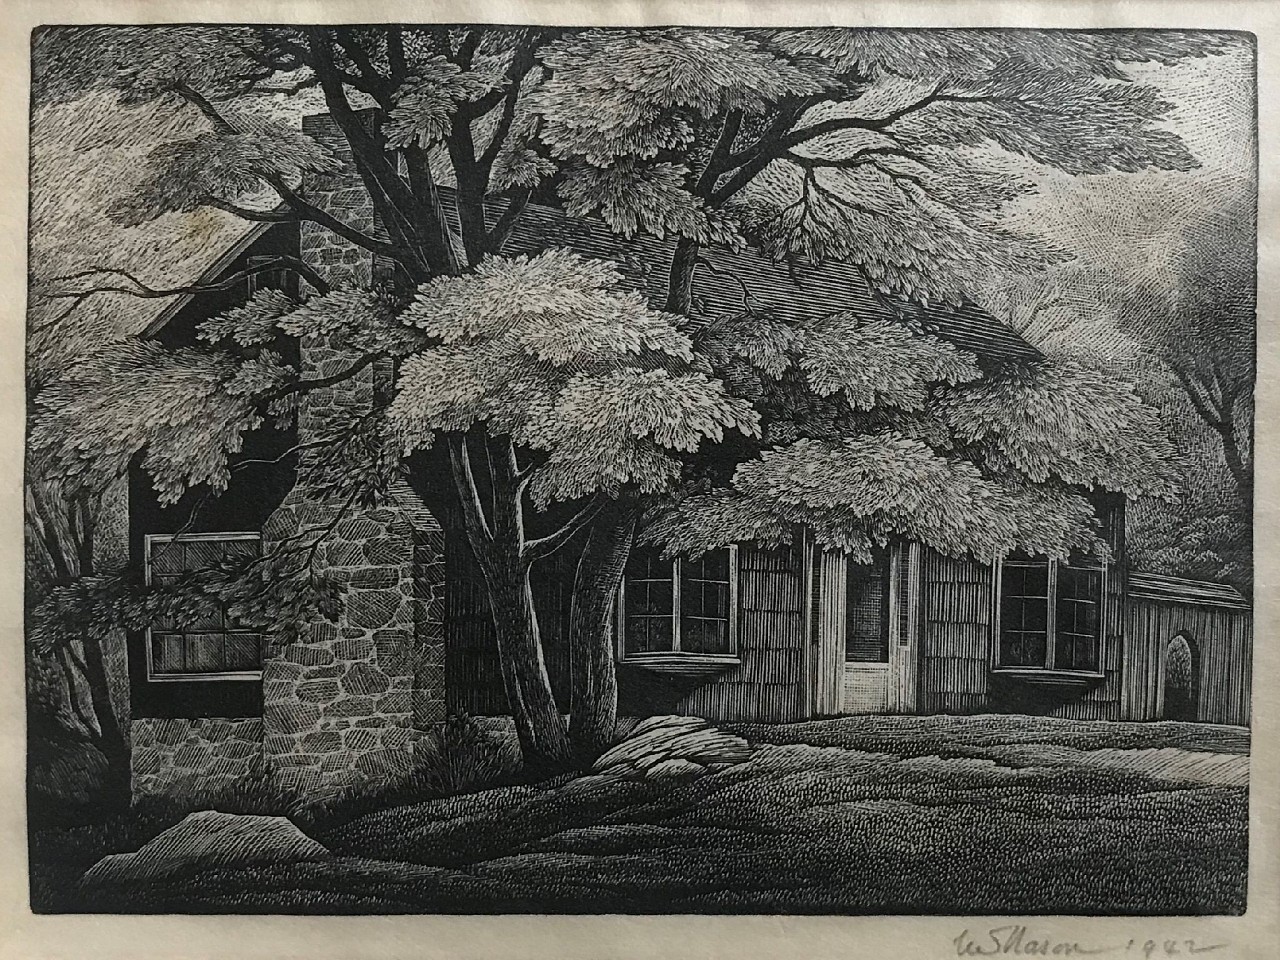 Thomas Willoughby Nason, The Red House, 1942
wood engraving, edition of 35 proofs, 4"" x 5 1/2""

BPL #328
JWC 0119.23
$450